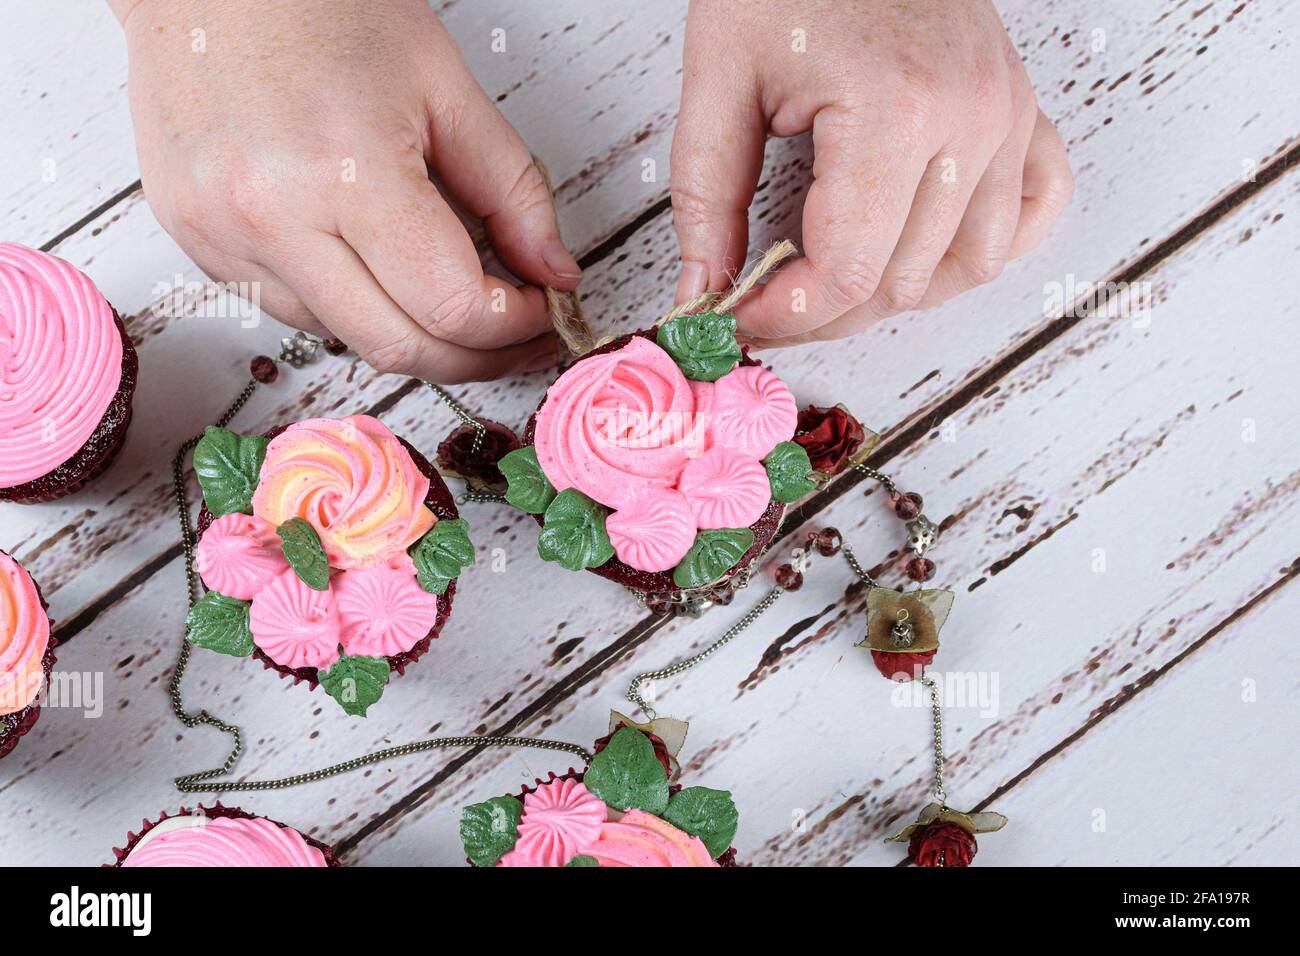 Red velvet cupcakes decorated with sisal lace, surrounded by a female necklace. Confectioner decorating a cupcake. Stock Photo